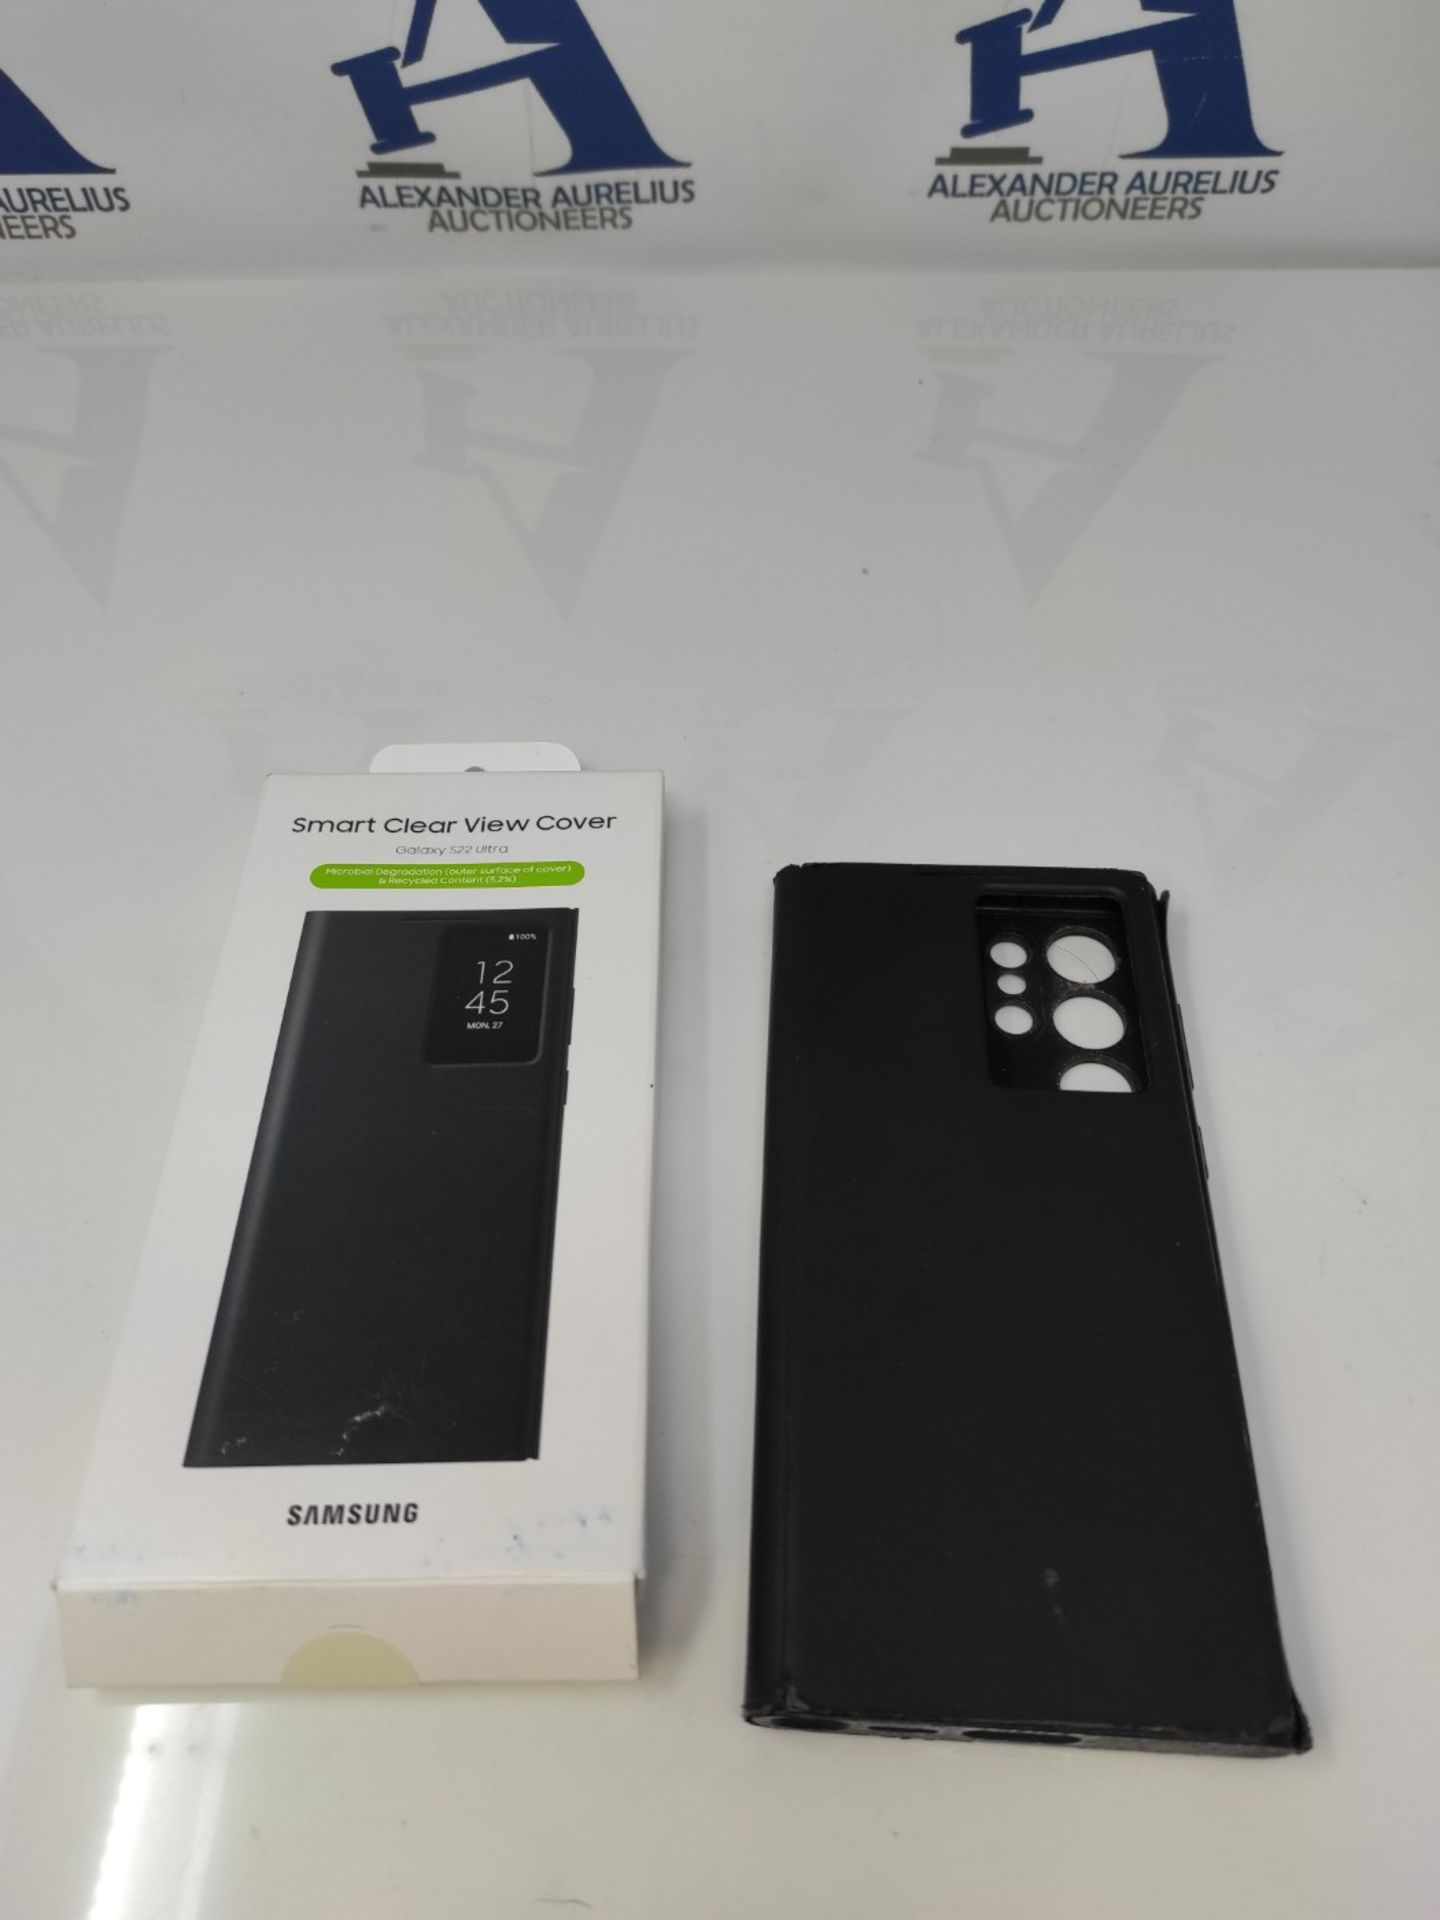 Samsung Official S22 Ultra Smart Clear View Cover Black - Image 2 of 2